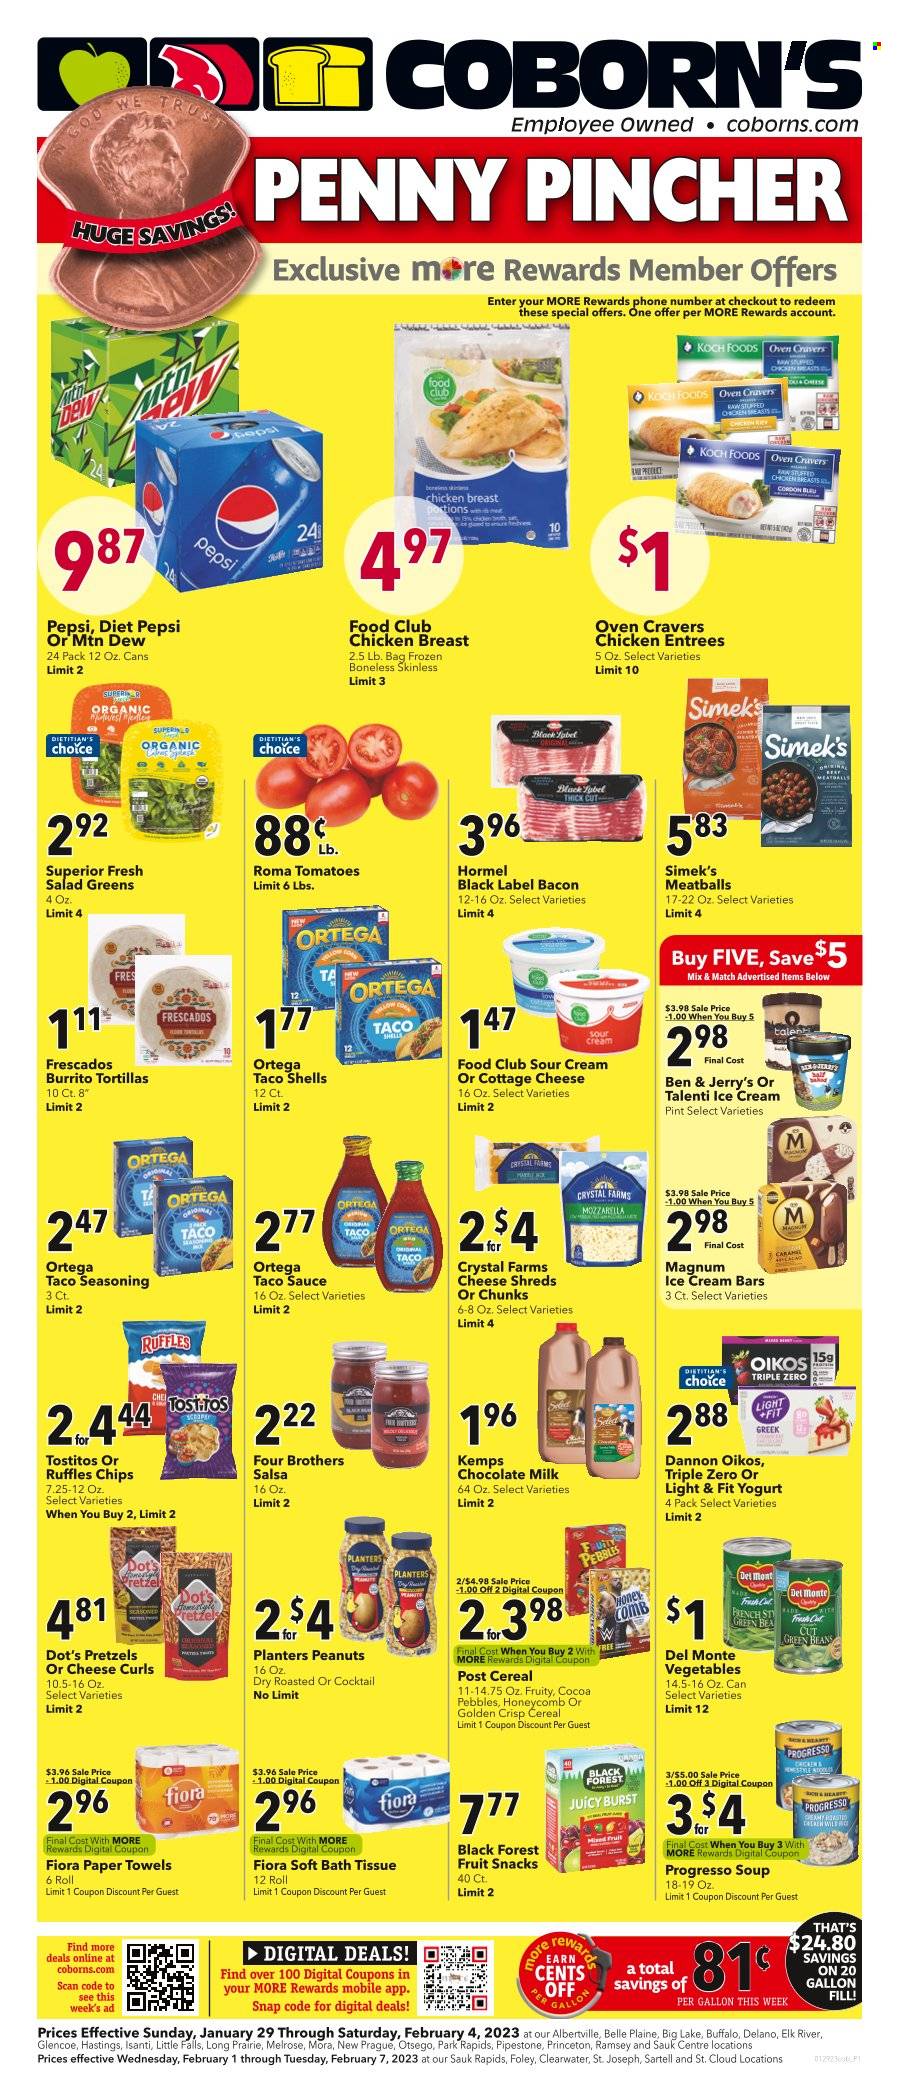 thumbnail - Coborn's Flyer - 01/29/2023 - 02/04/2023 - Sales products - tortillas, pretzels, beans, green beans, salad greens, snack, meatballs, soup, Progresso, Four Brothers, Hormel, ready meal, chicken breasts, cottage cheese, shredded cheese, cheese, Melrose, chunk cheese, Kemps, Oikos, Dannon, flavoured milk, ice cream, ice cream bars, Ben & Jerry's, Talenti Gelato, fruit snack, Ruffles, Tostitos, salty snack, canned vegetables, Del Monte, spice, taco sauce, salsa, honey, peanuts, Planters, Mountain Dew, Pepsi, Diet Pepsi, soft drink, carbonated soft drink, bath tissue, kitchen towels, paper towels, comb, Trust. Page 1.